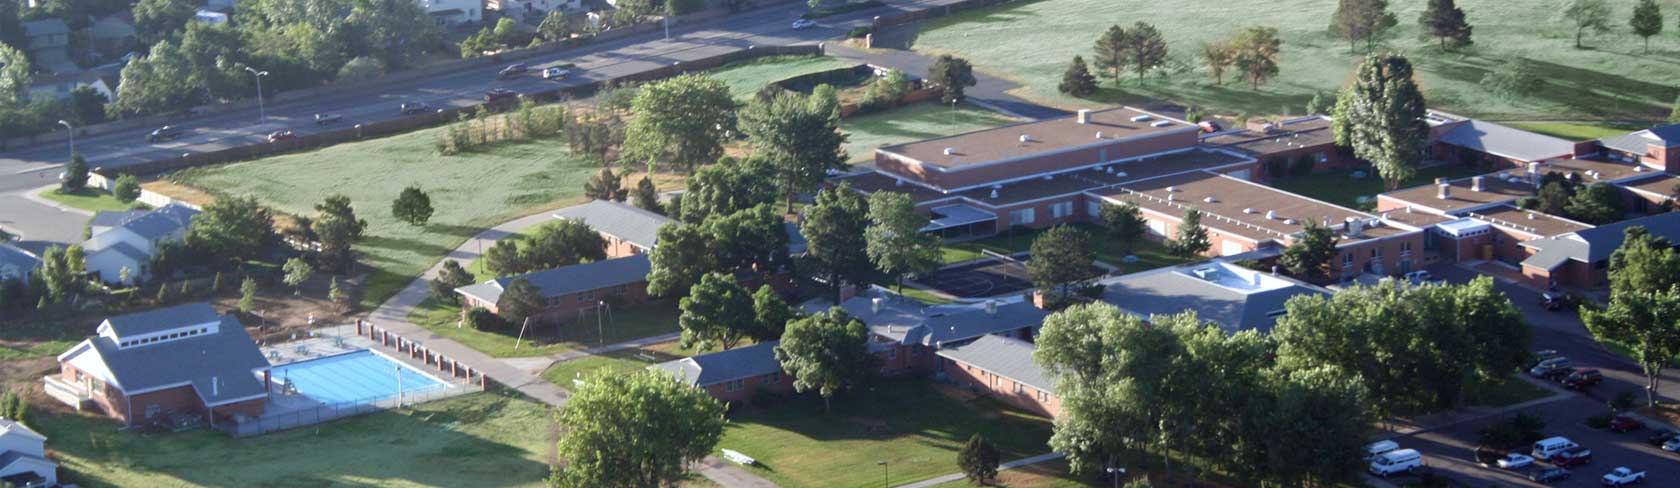 Excelsior Youth Centre Campus